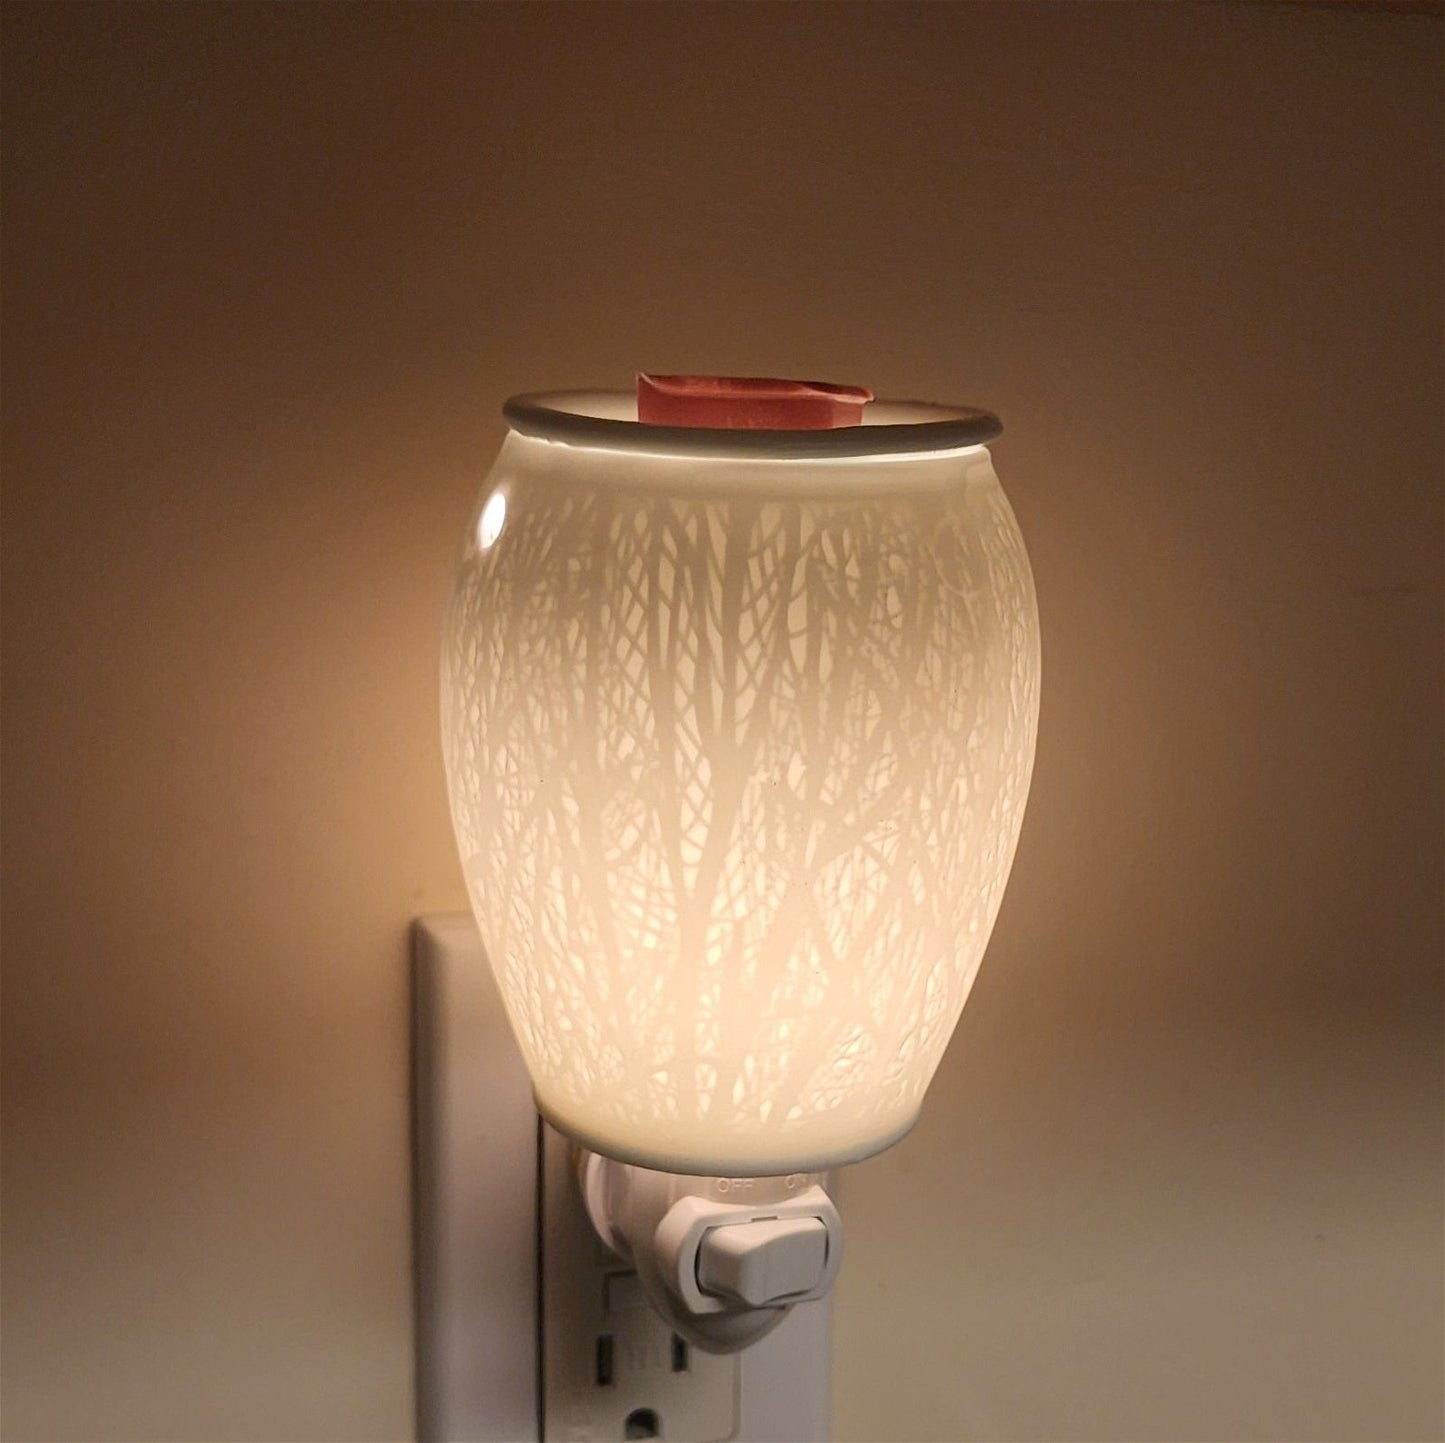 White Branches Electric US Plug-in Wax Warmer / Oil Burner - D SCENT 